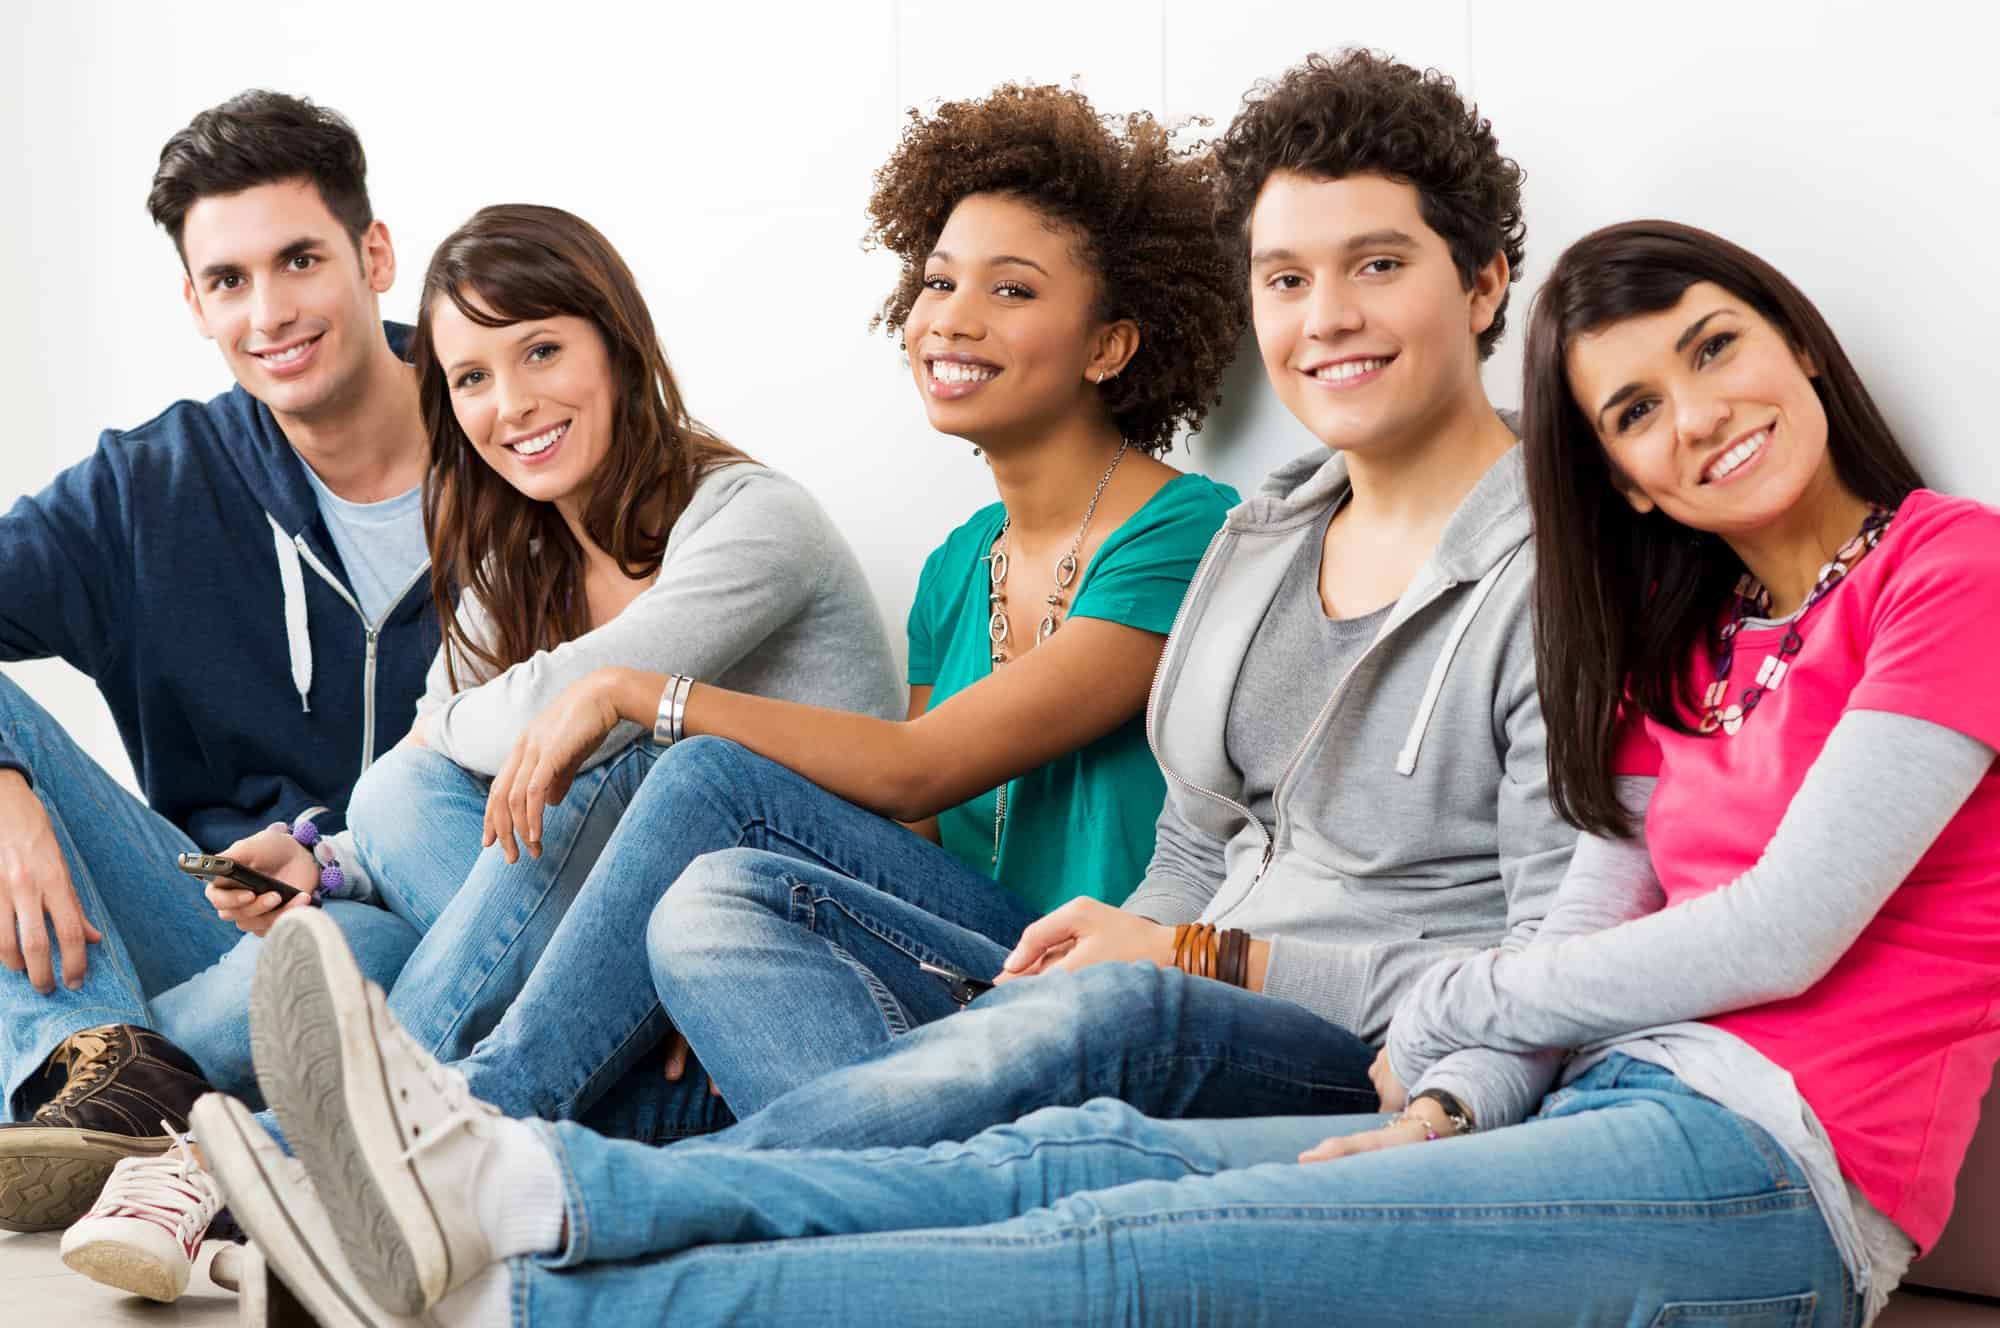 Group of smiling young people receiving Invisalign teen treatment